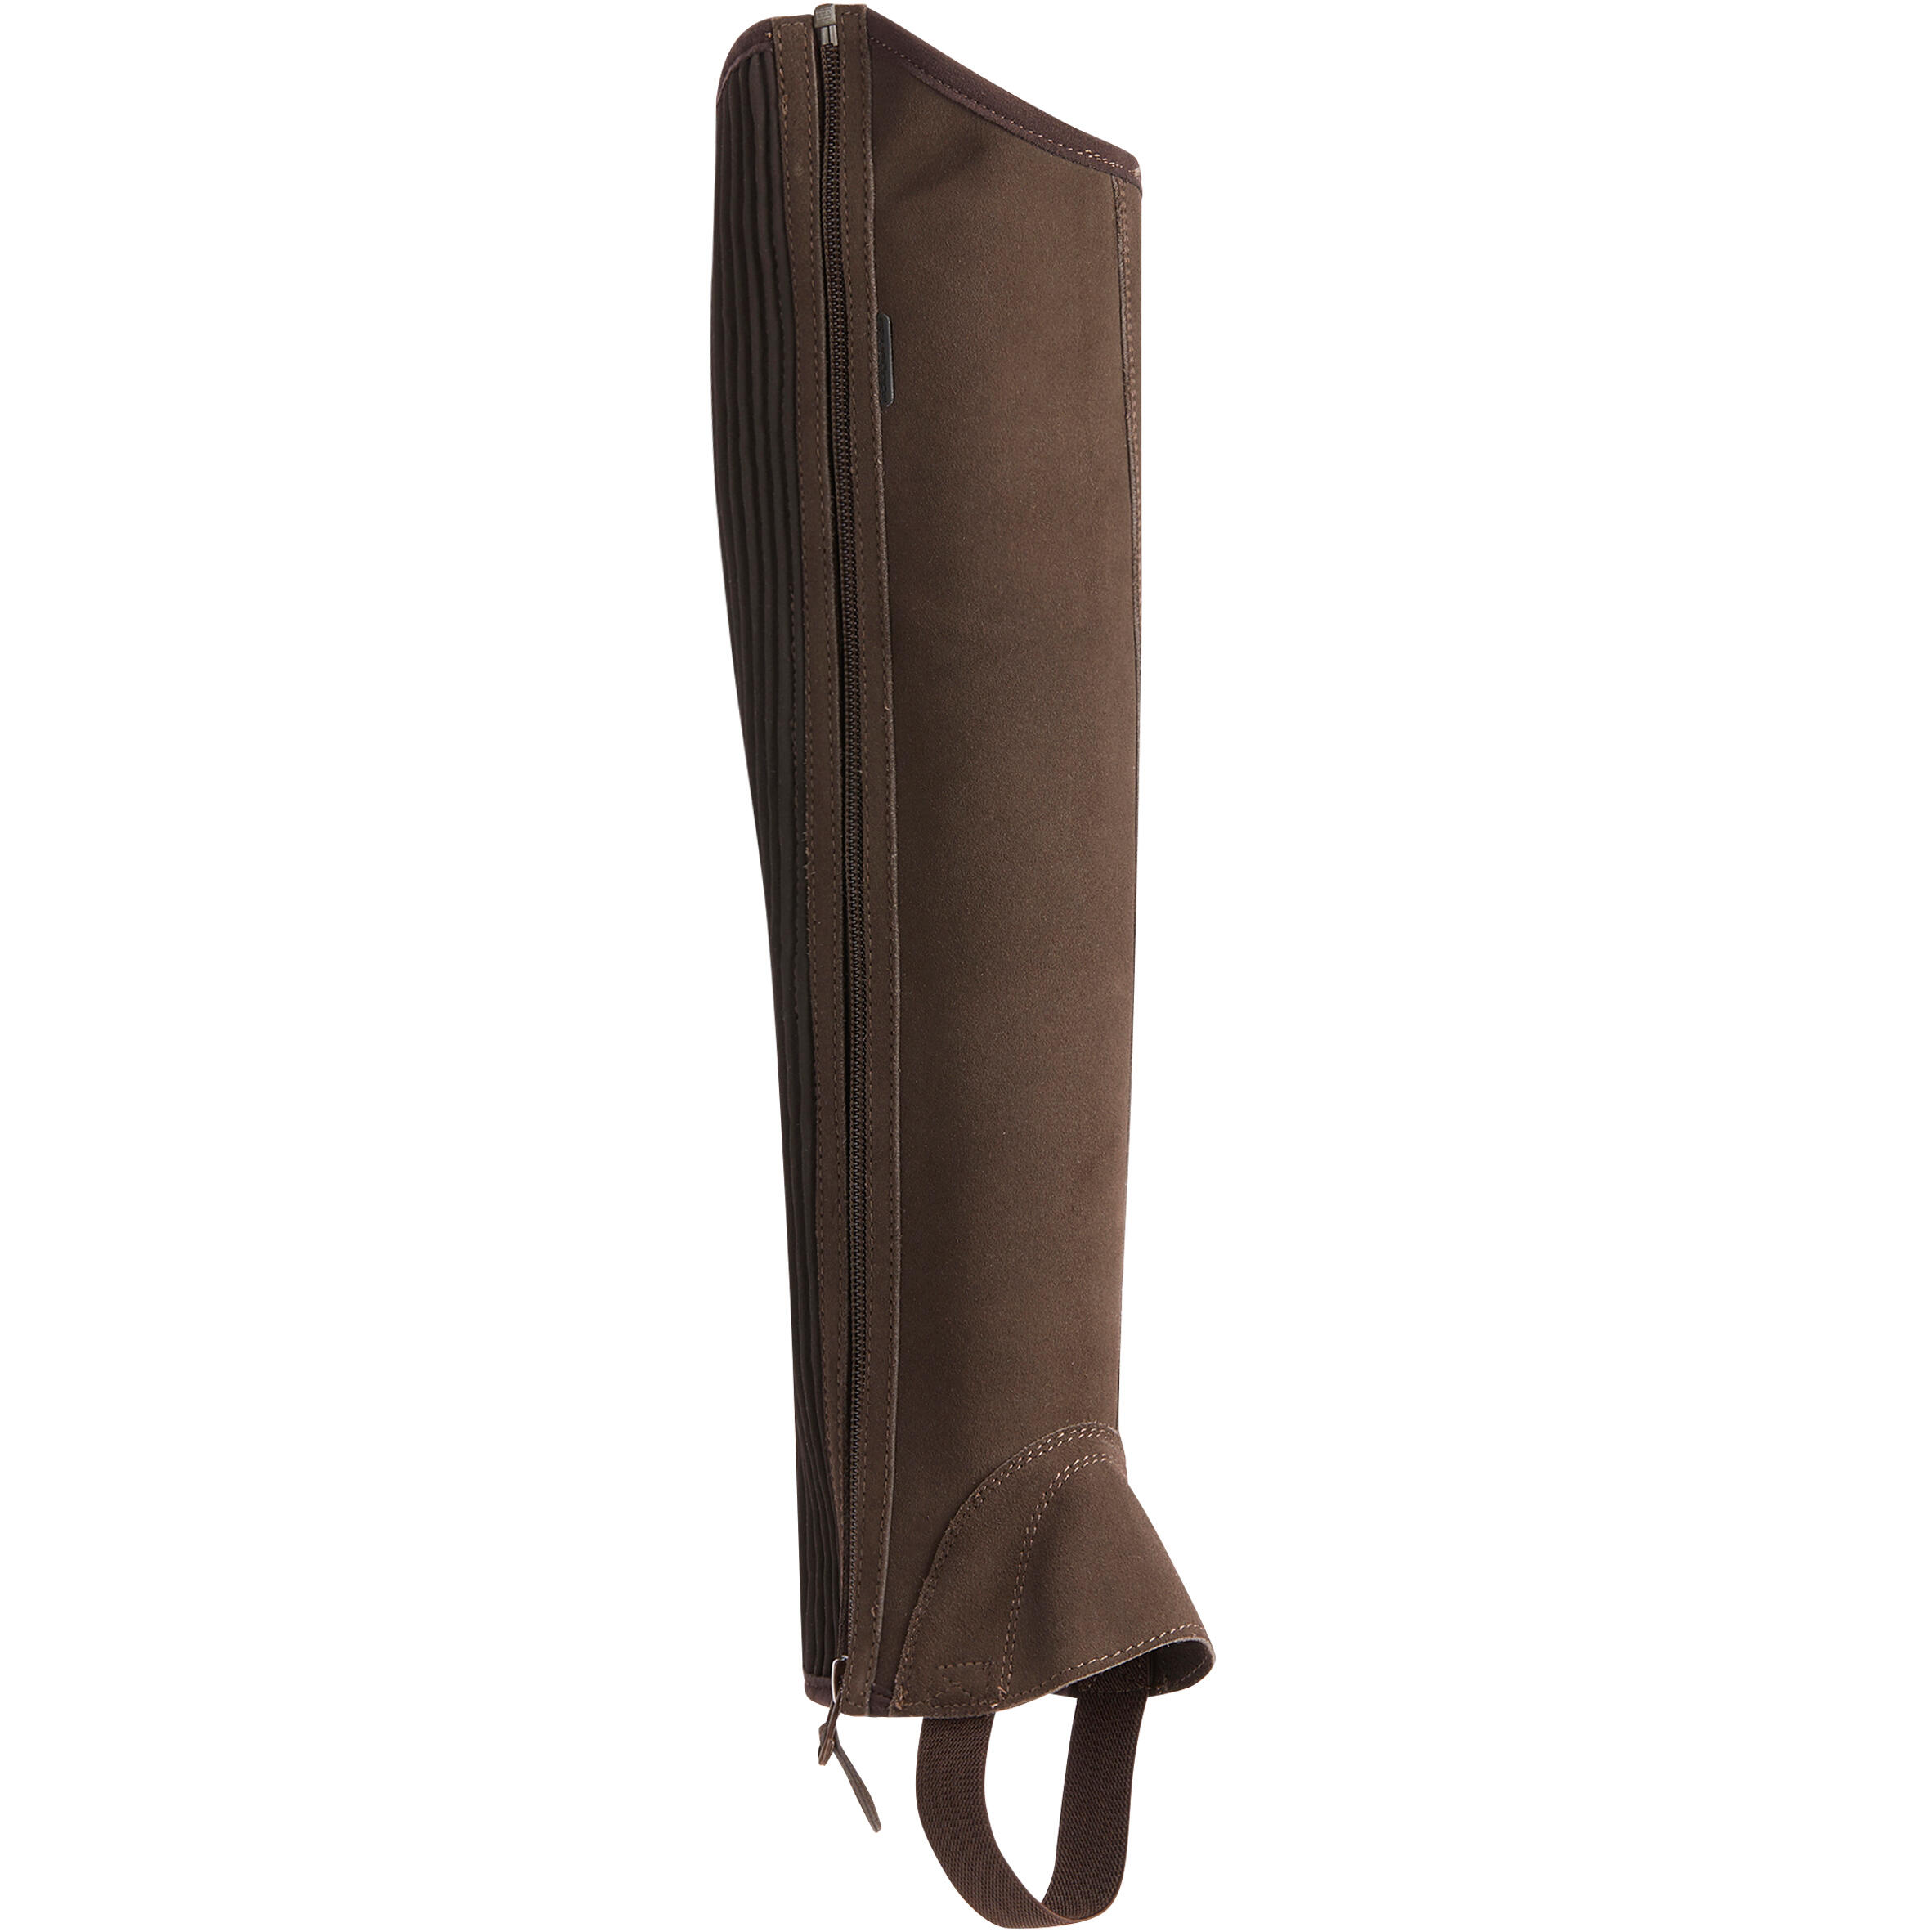 FOUGANZA Sentier Adult Horse Riding Gusseted Half-Chaps - Brown